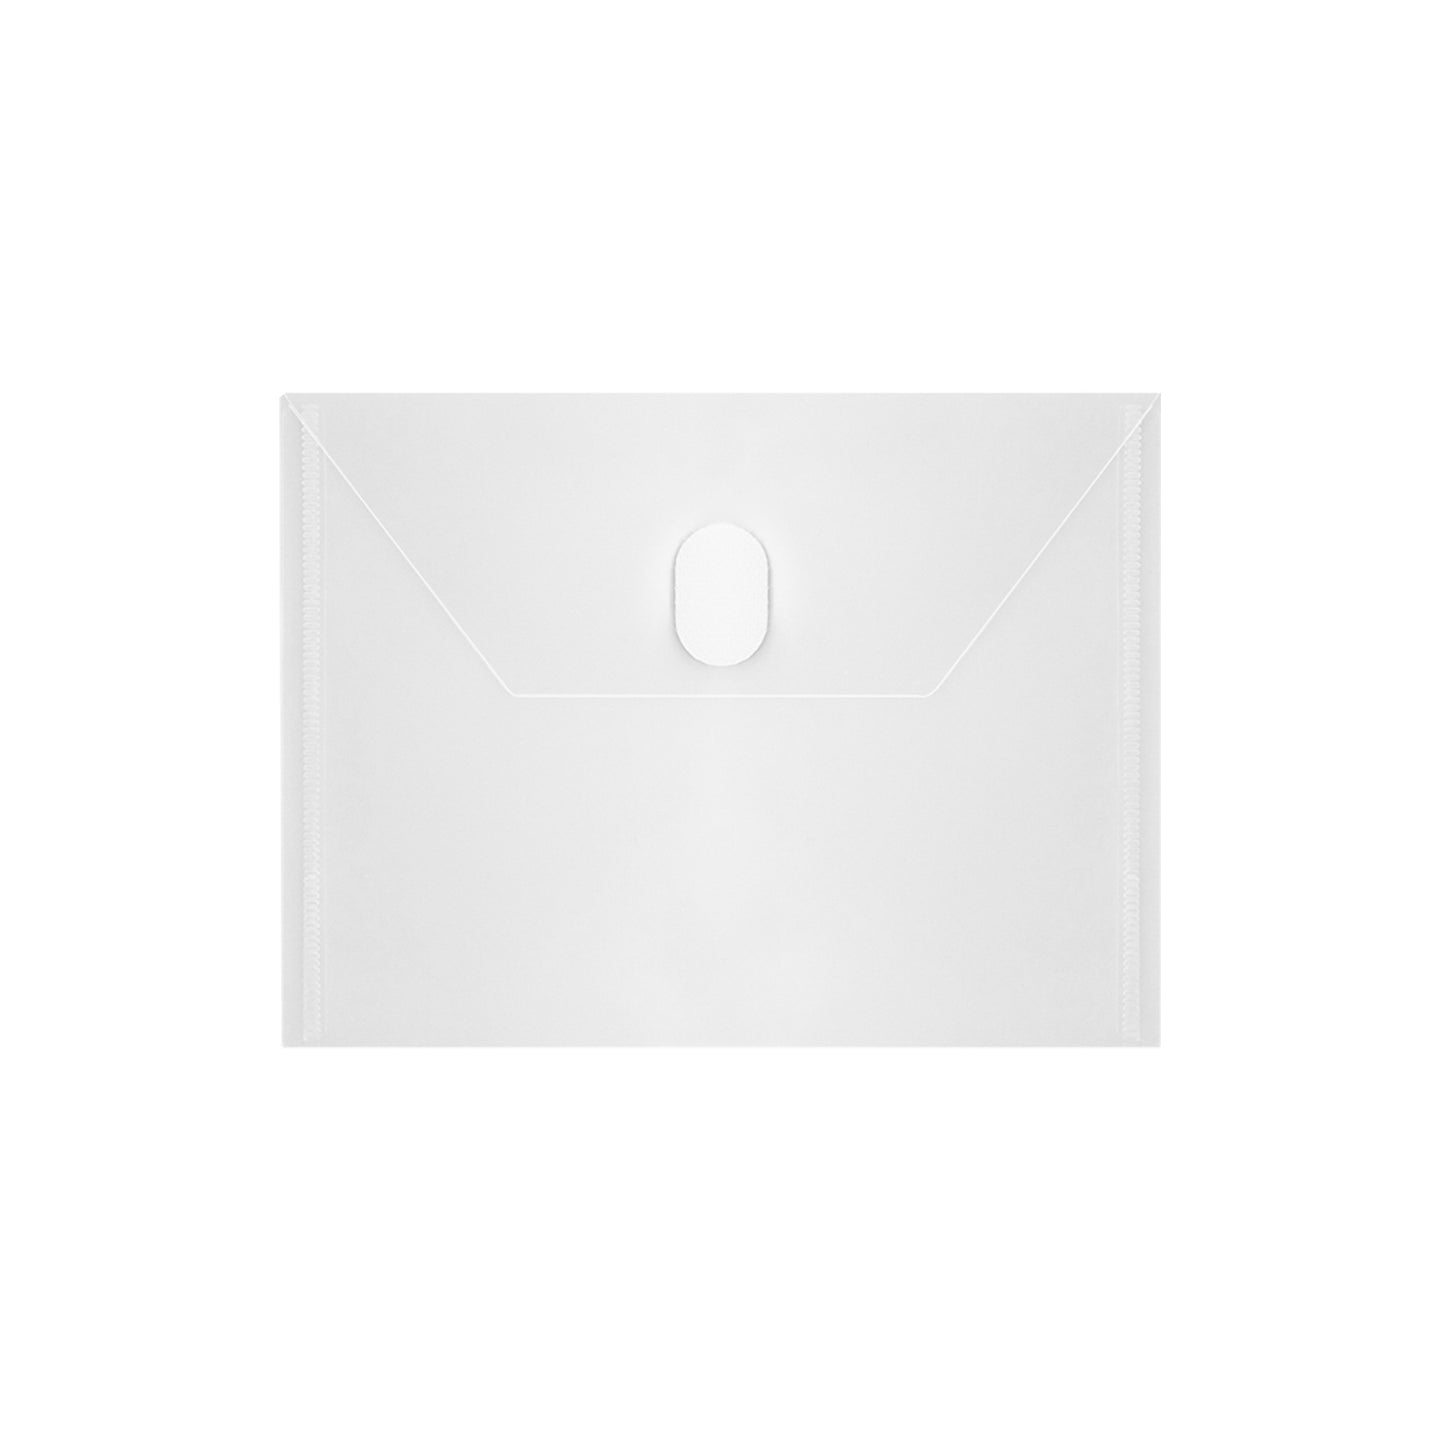 YoeeJob 5x7 Small Plastic Envelopes with Hoop & Loop Closure, Clear Poly Envelopes